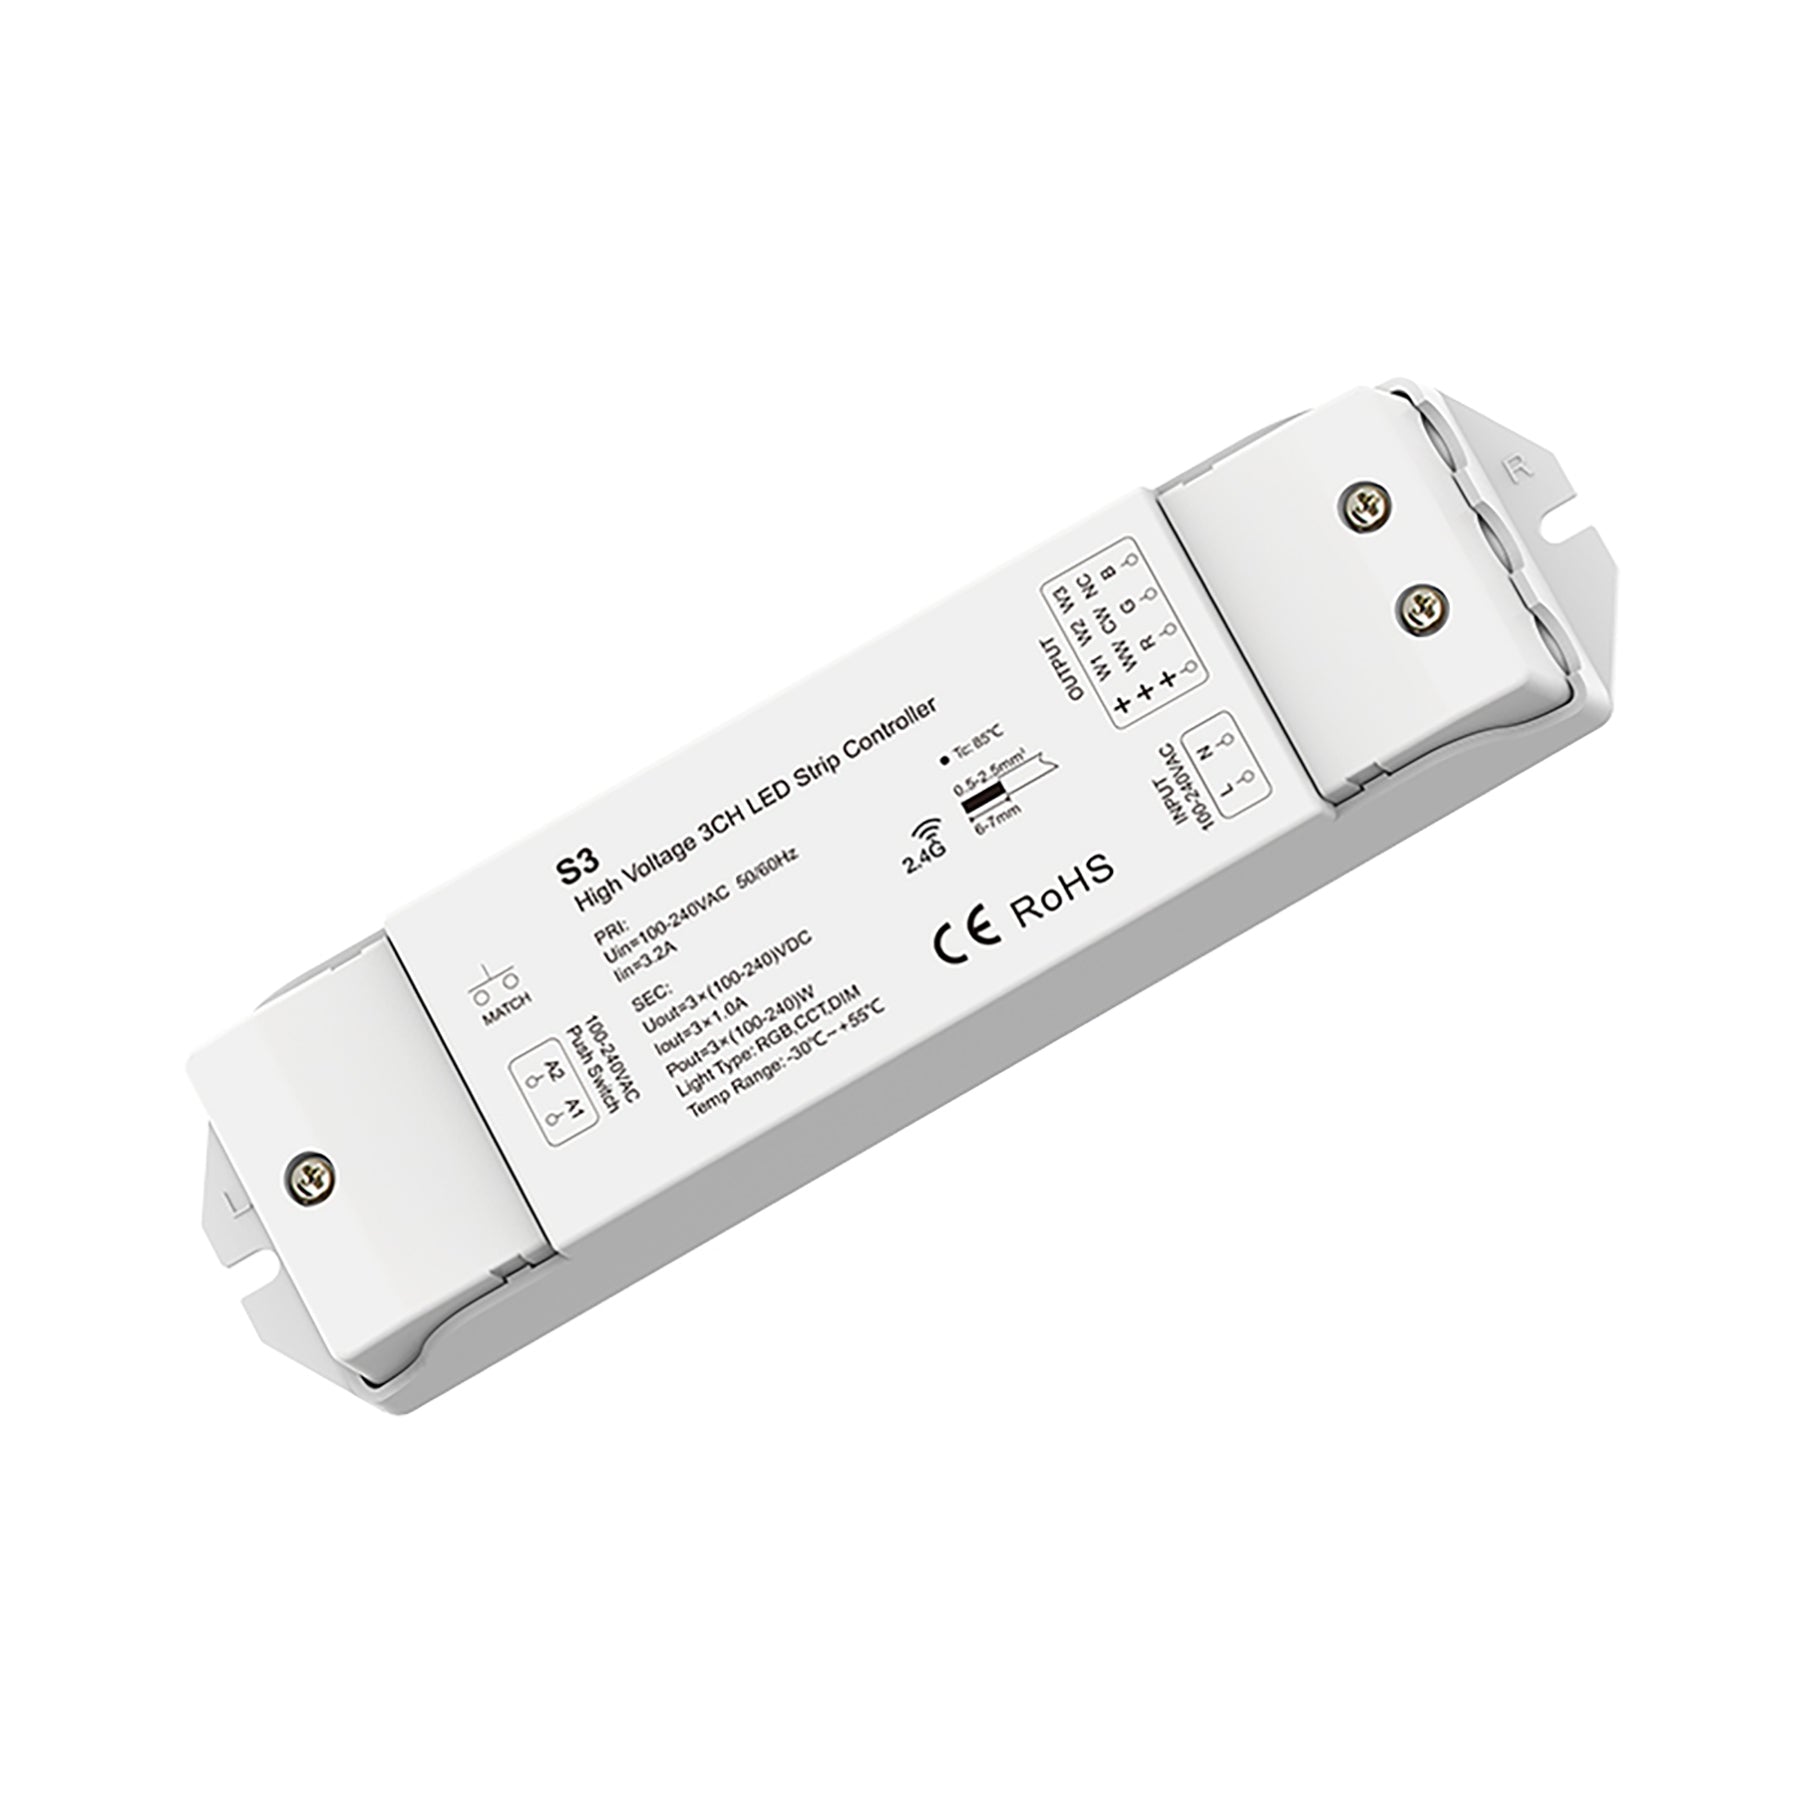 G.W.S. LED LED 100-240V AC RGB/RGBW Controller S3 + 4 Zone Panel Remote Control 2*AAA Battery T24